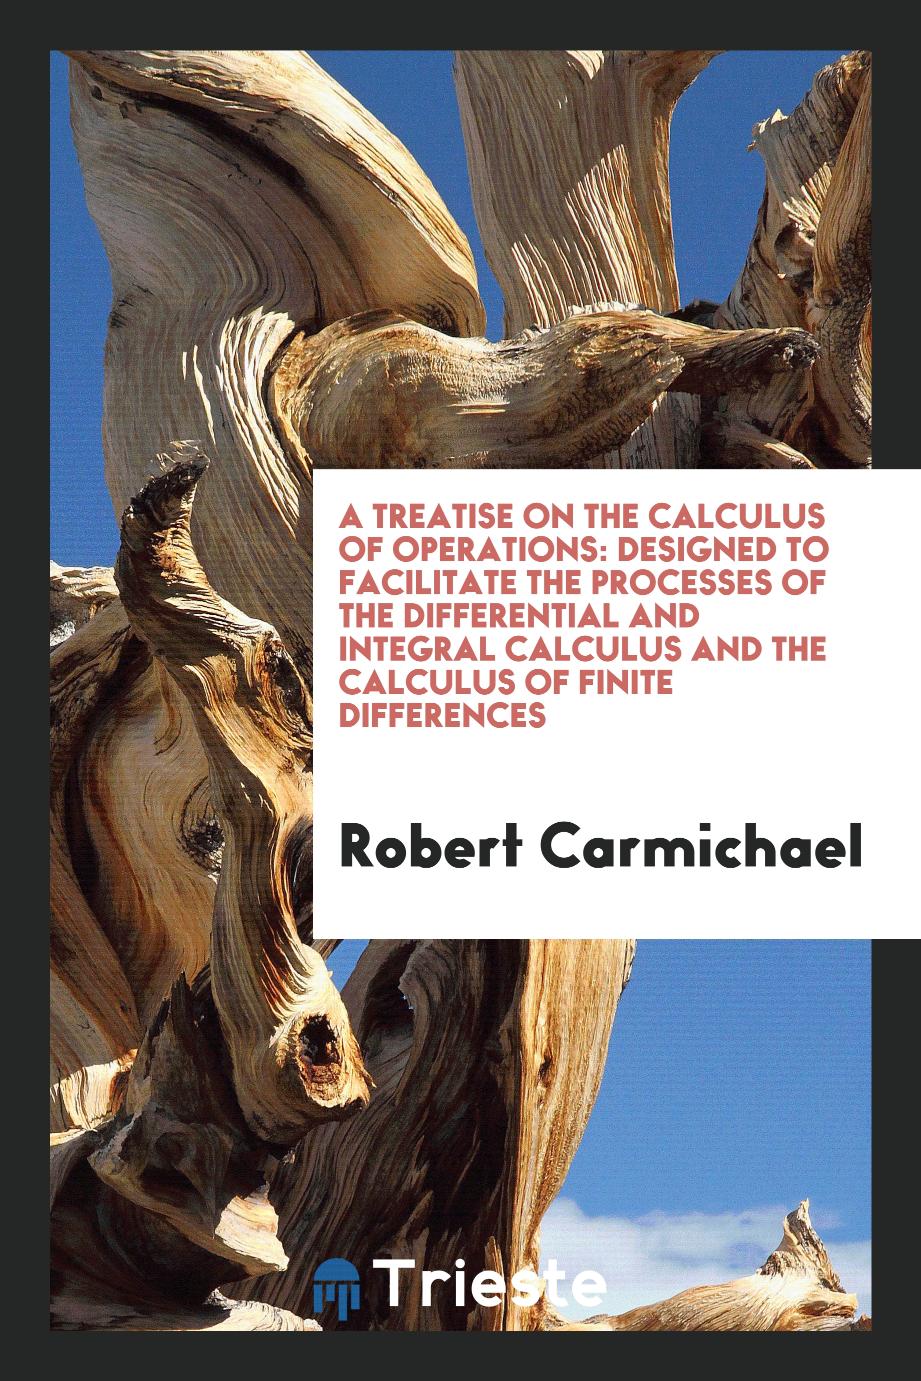 A treatise on the calculus of operations: designed to facilitate the processes of the differential and integral calculus and the calculus of finite differences